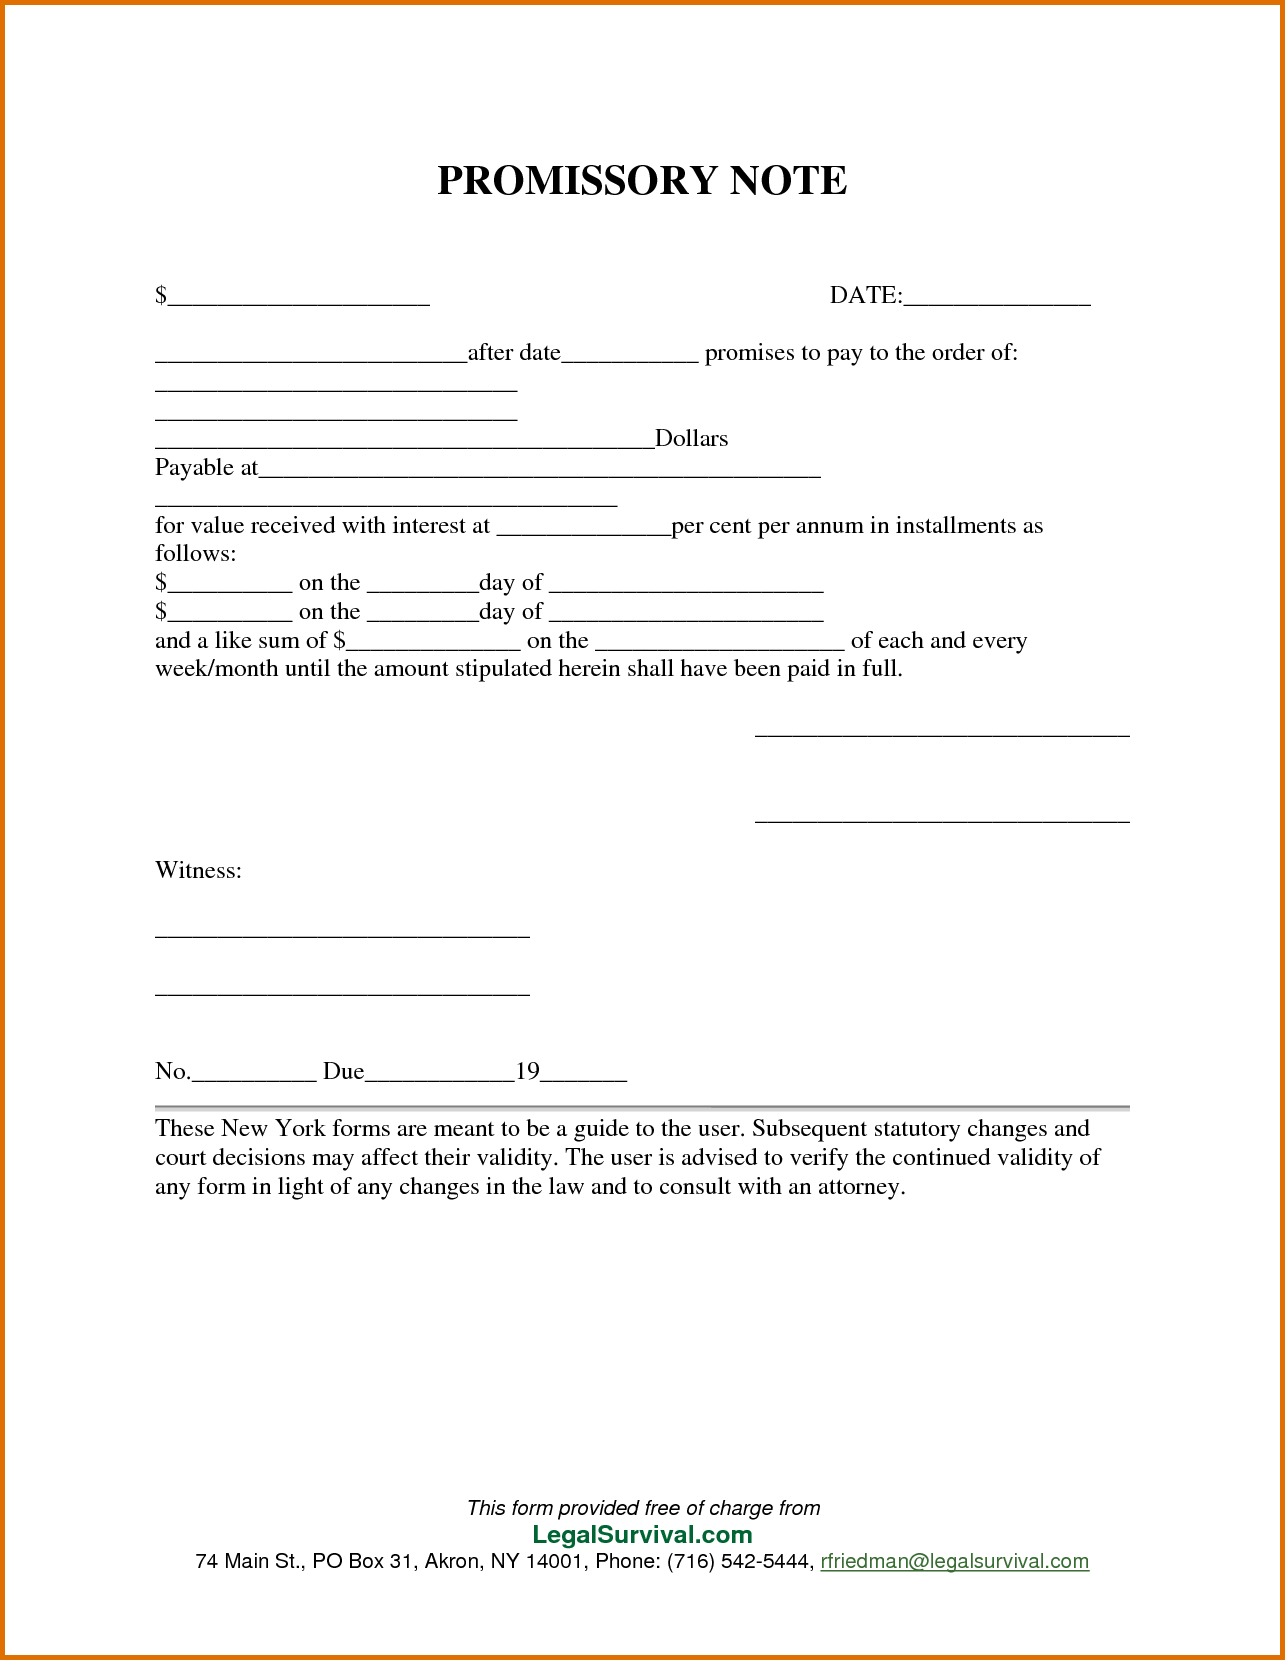 Promisorry Note Template